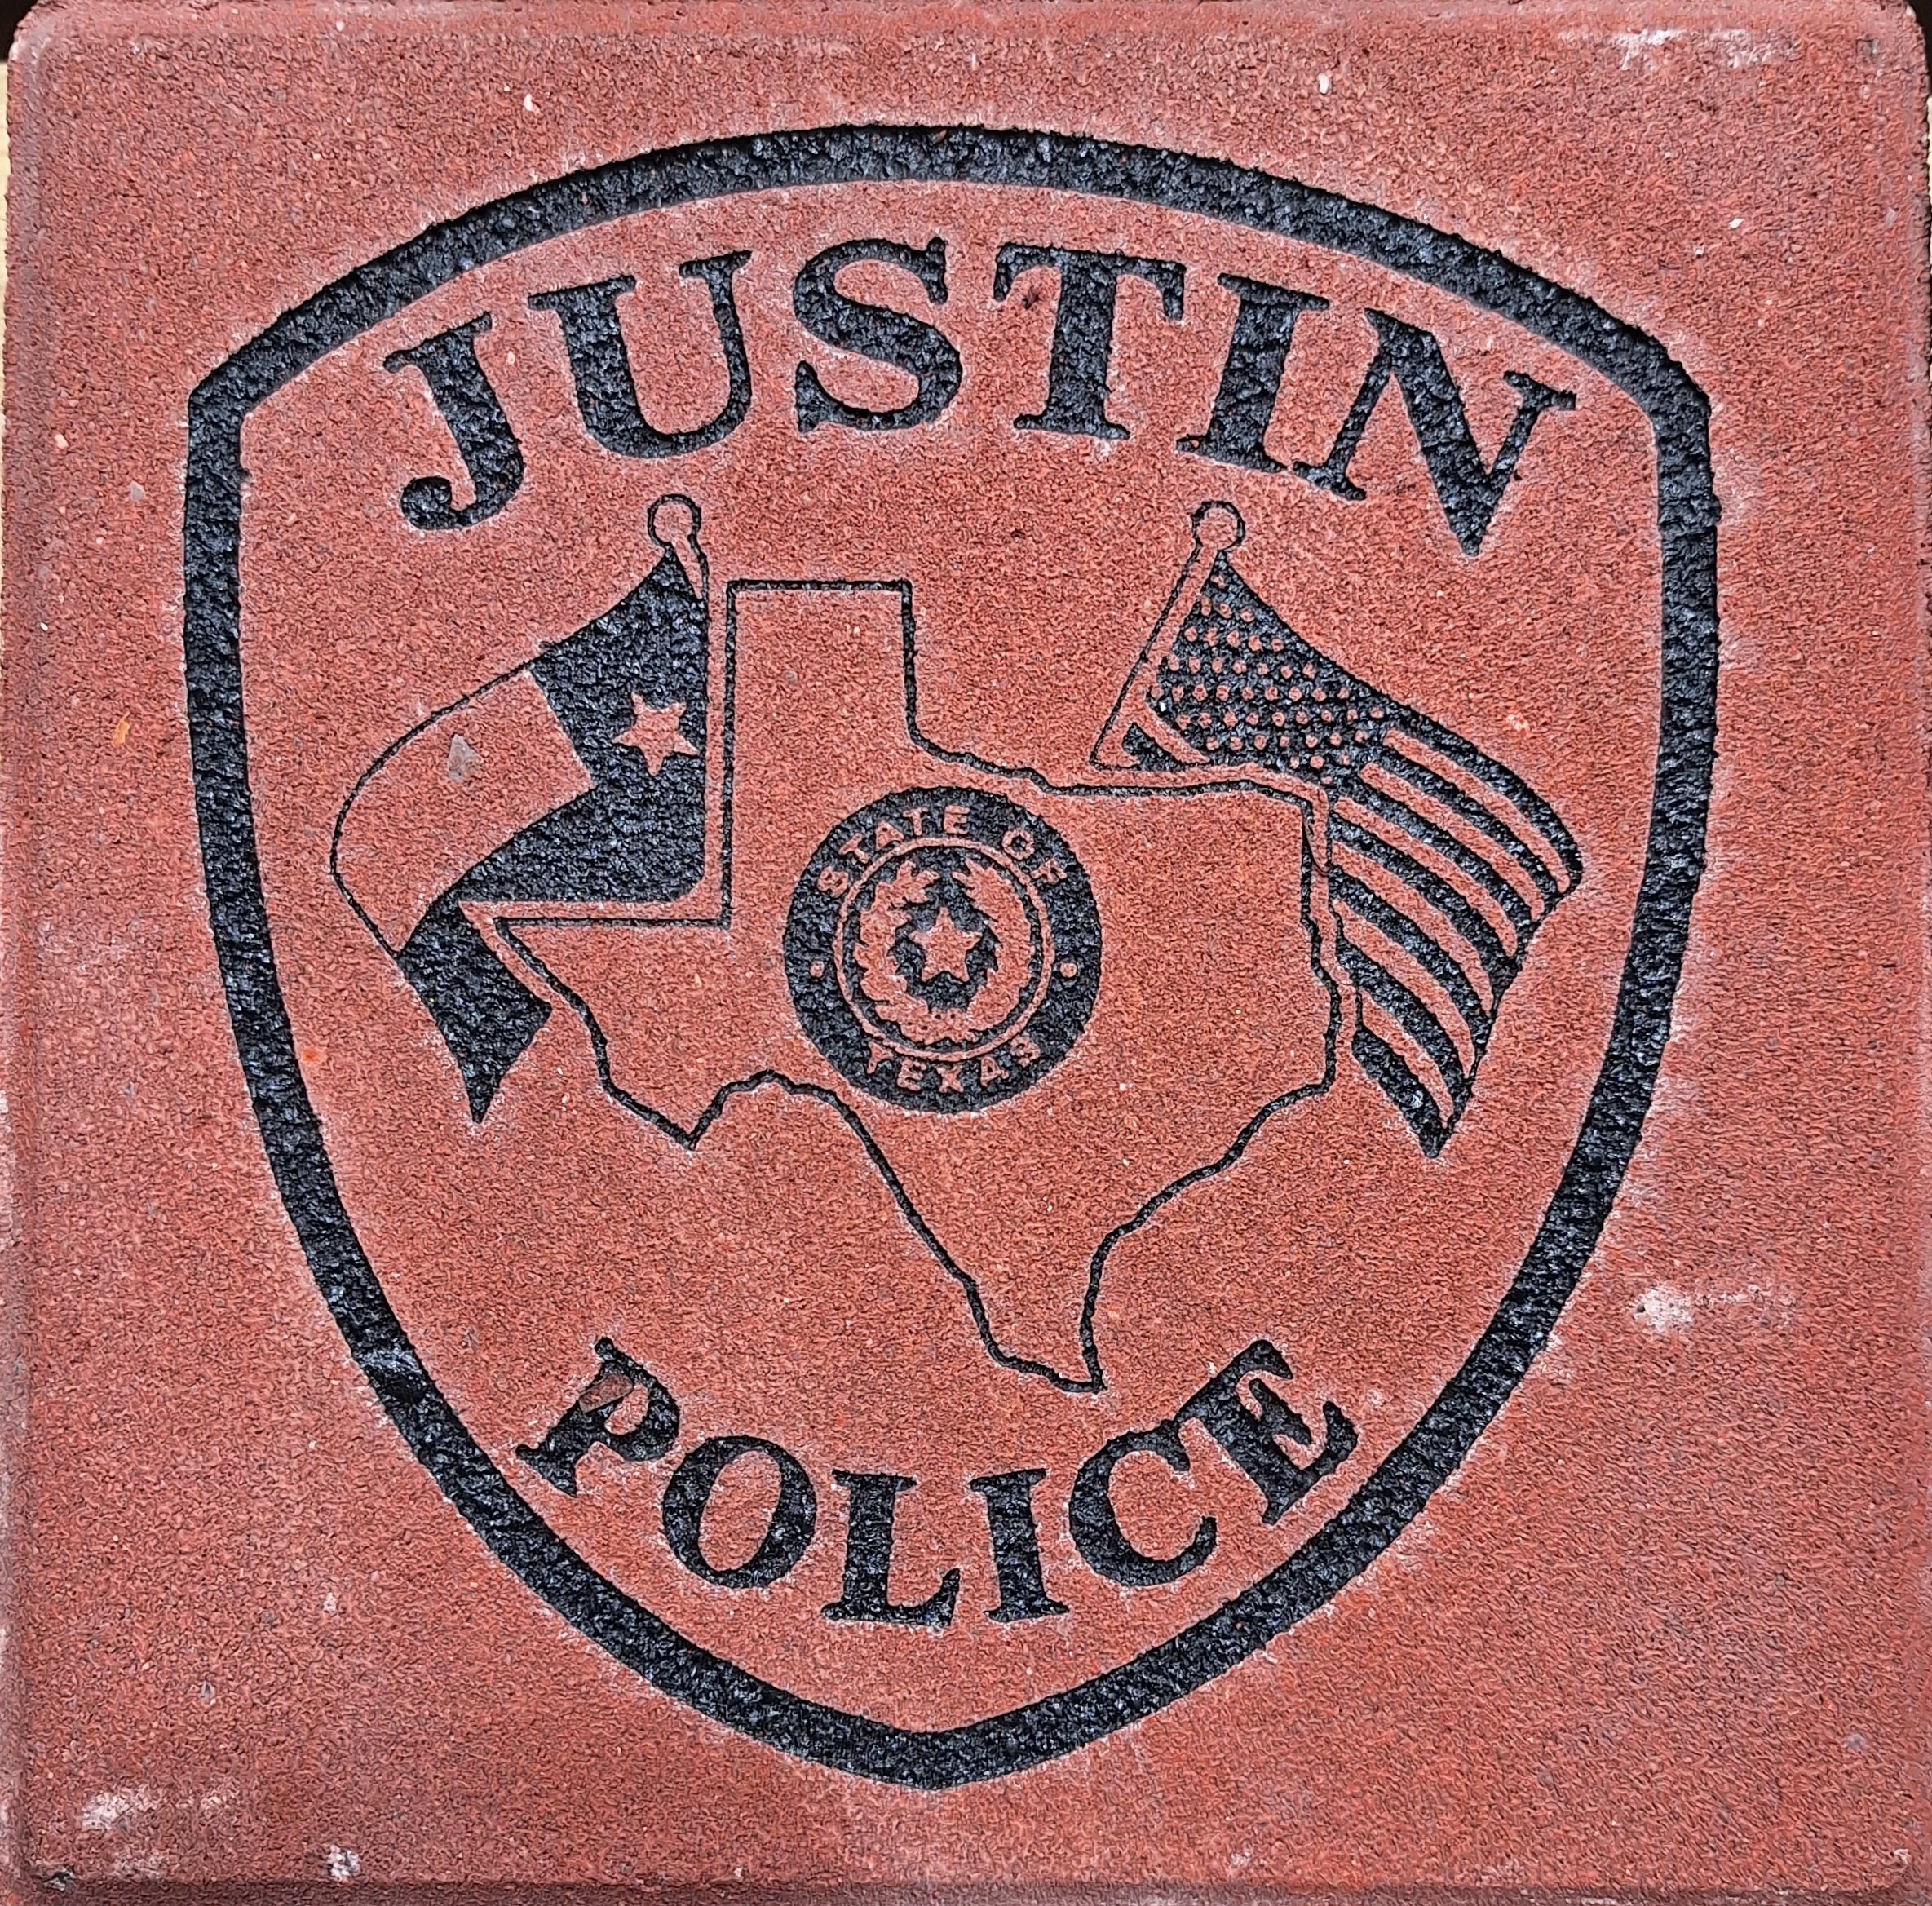 engraved brick with logo